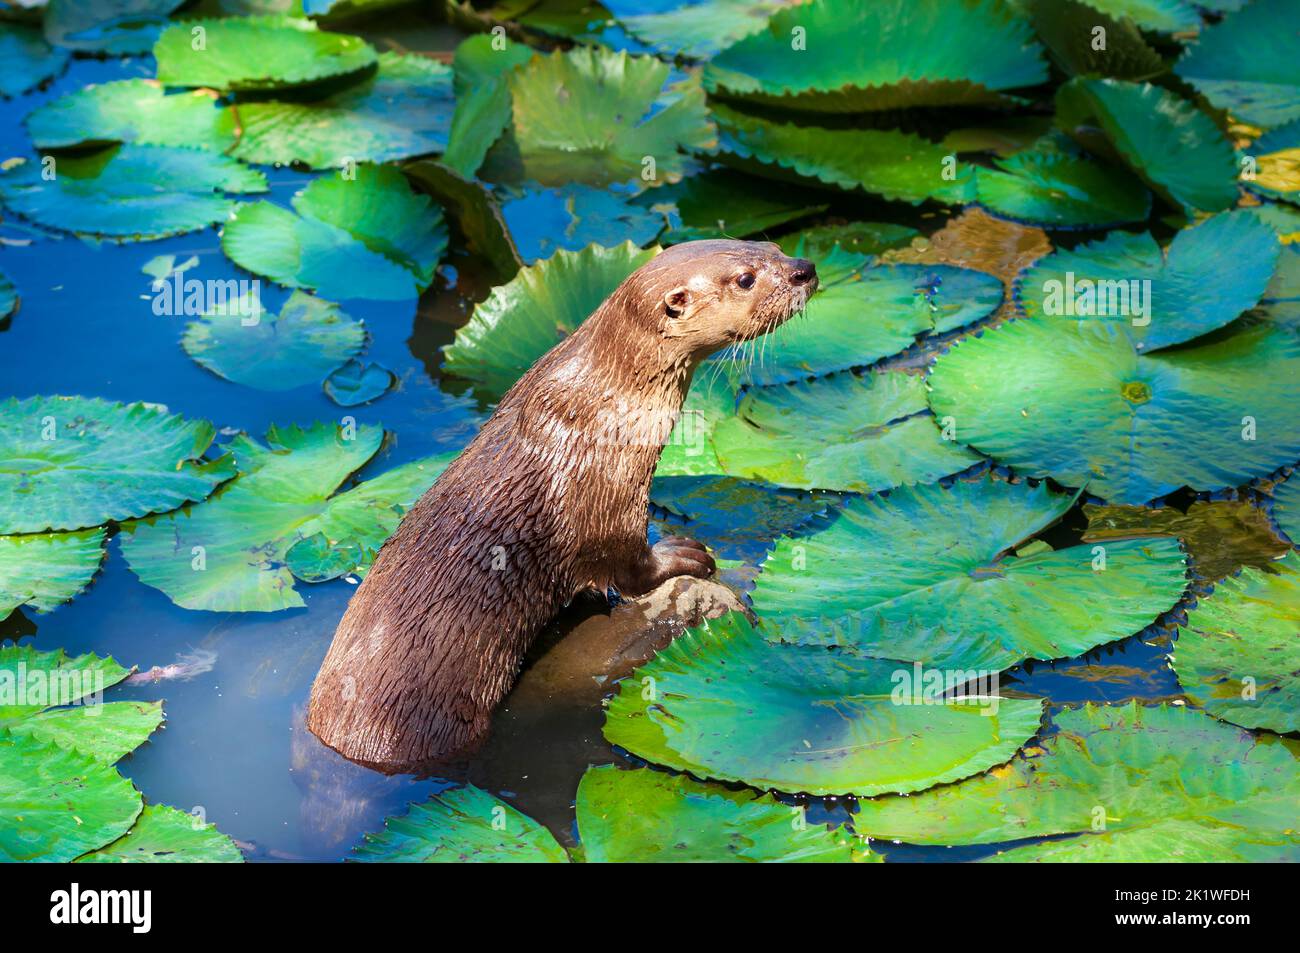 A curious sea otter in the jungles of Costa Rica, Central America, Caribbean. Stock Photo